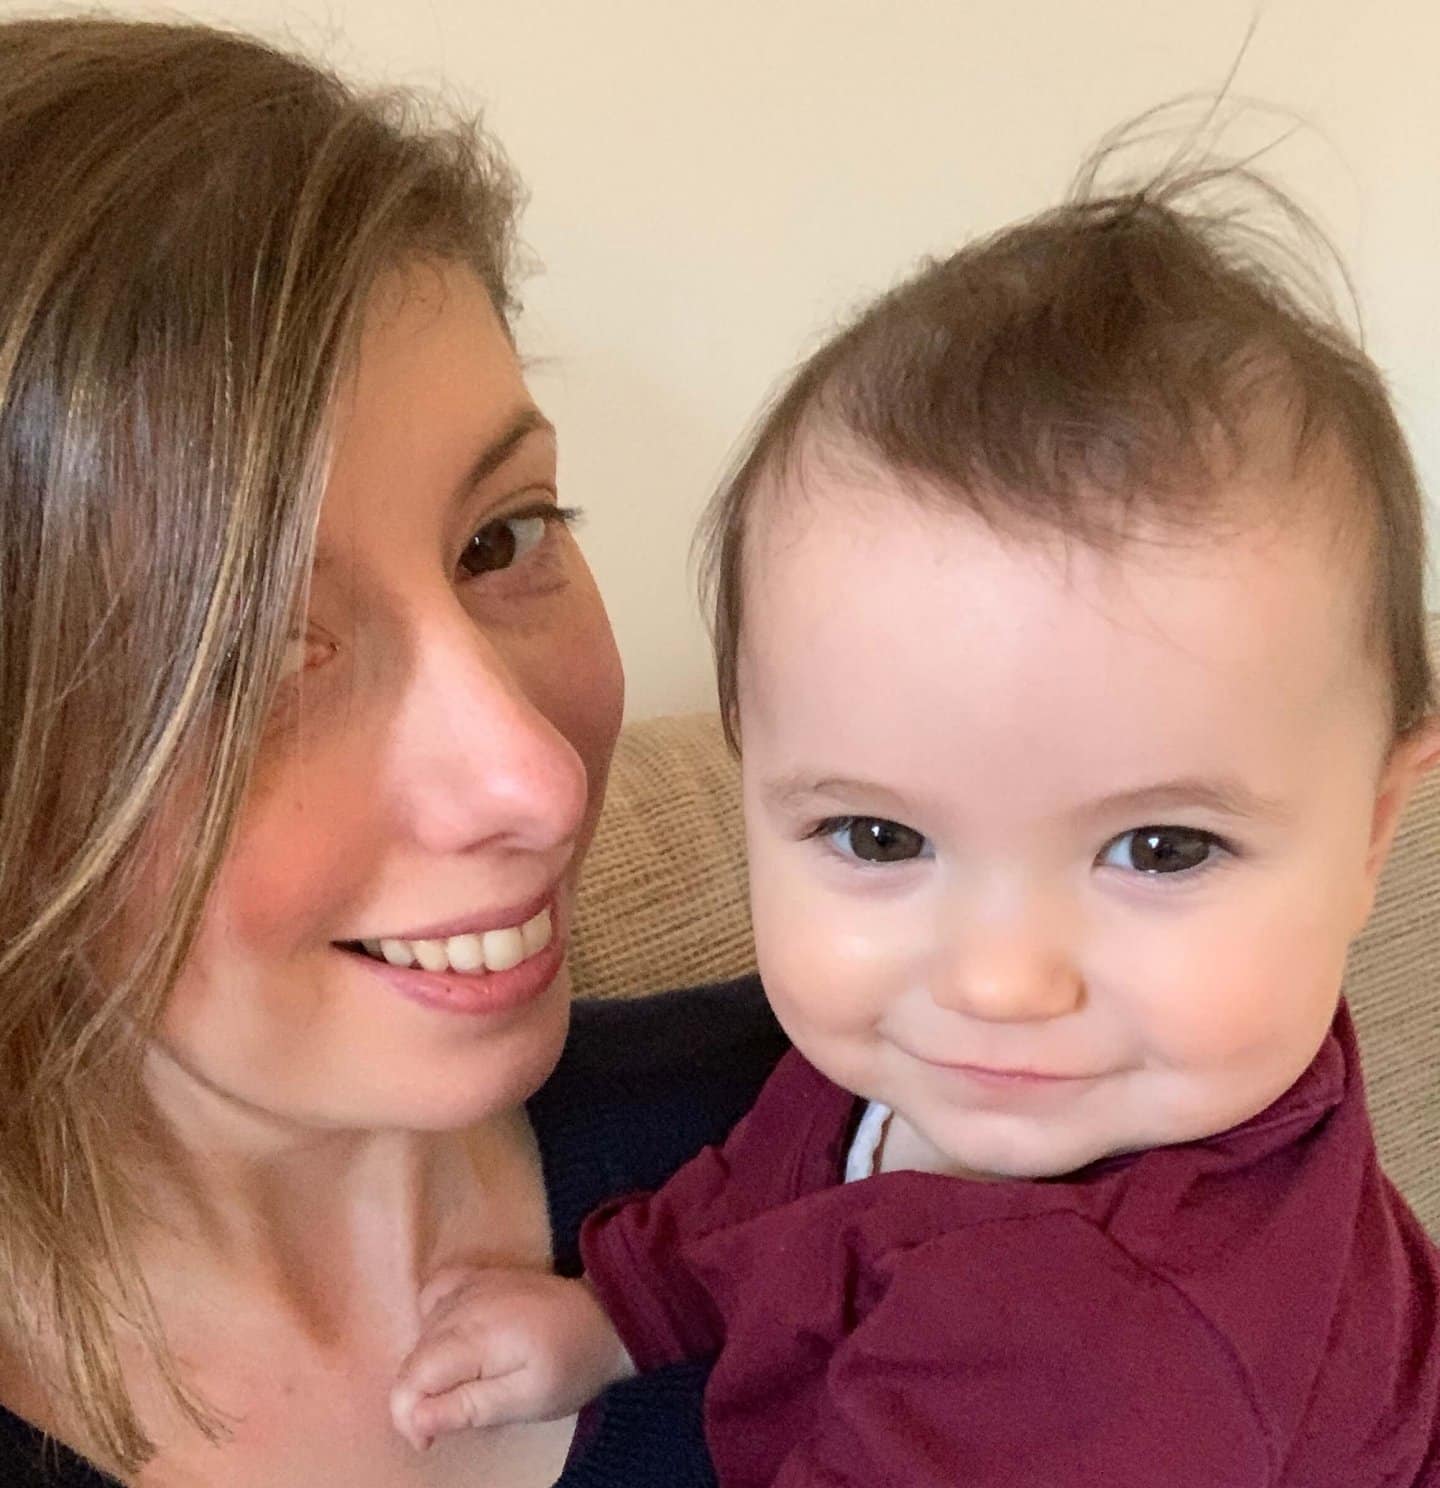 Postpartum Hair Loss: A chat with my hairdresser